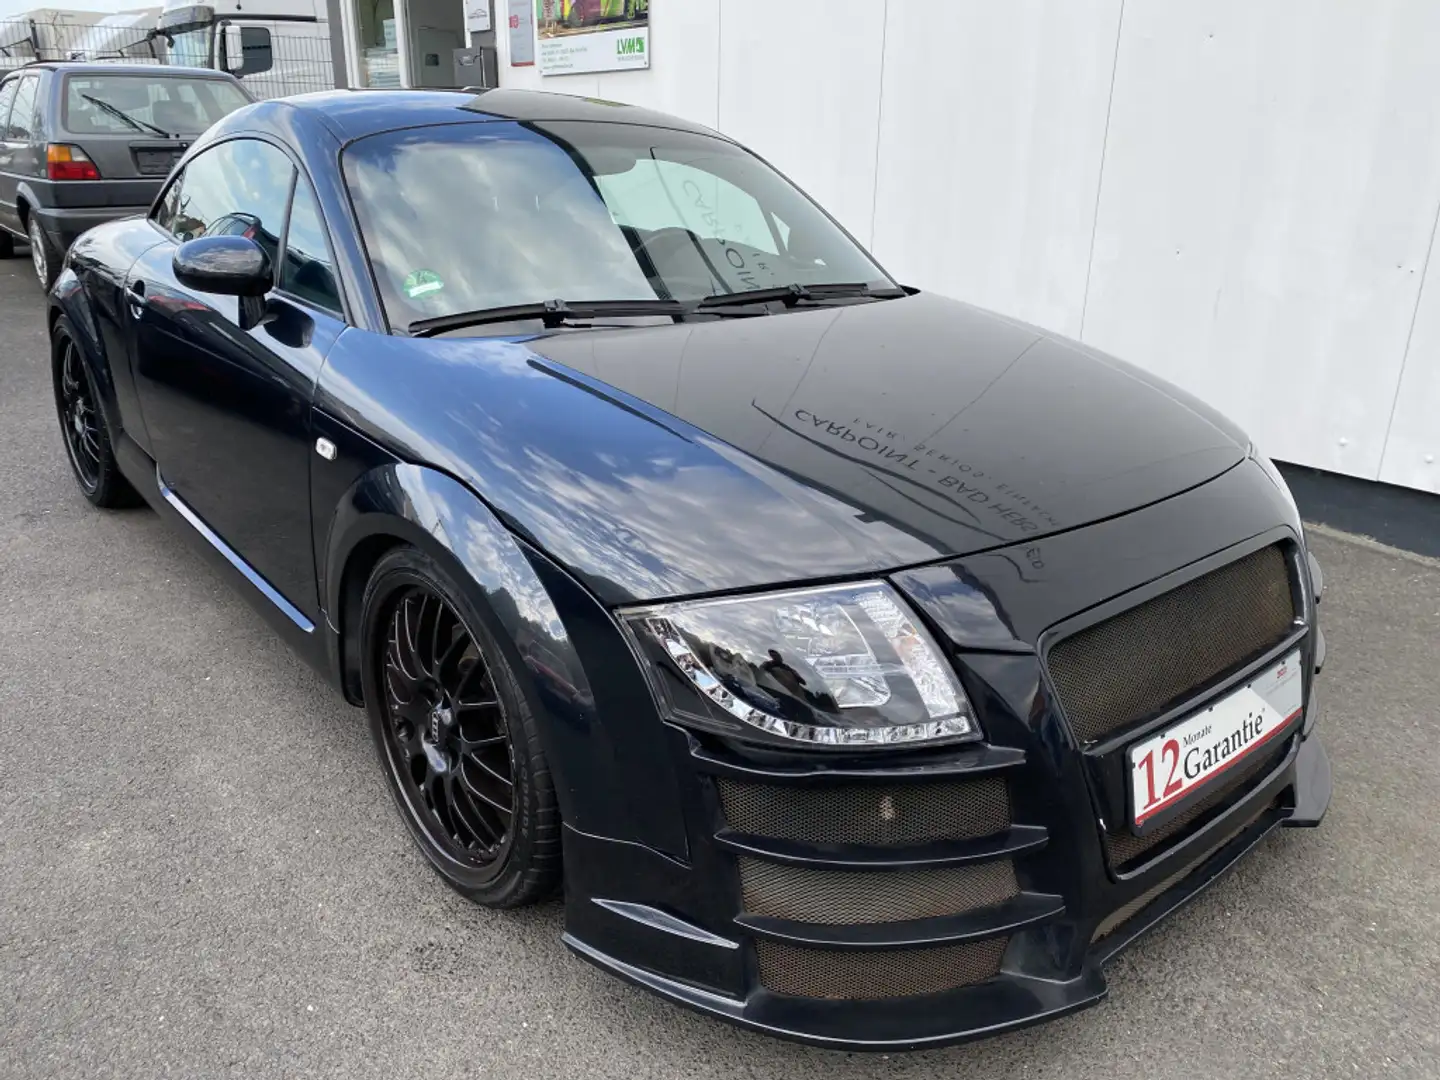 Audi TT 1.8 T Coupe (132kW) Coupe Roadster*BOSE* Black - 2